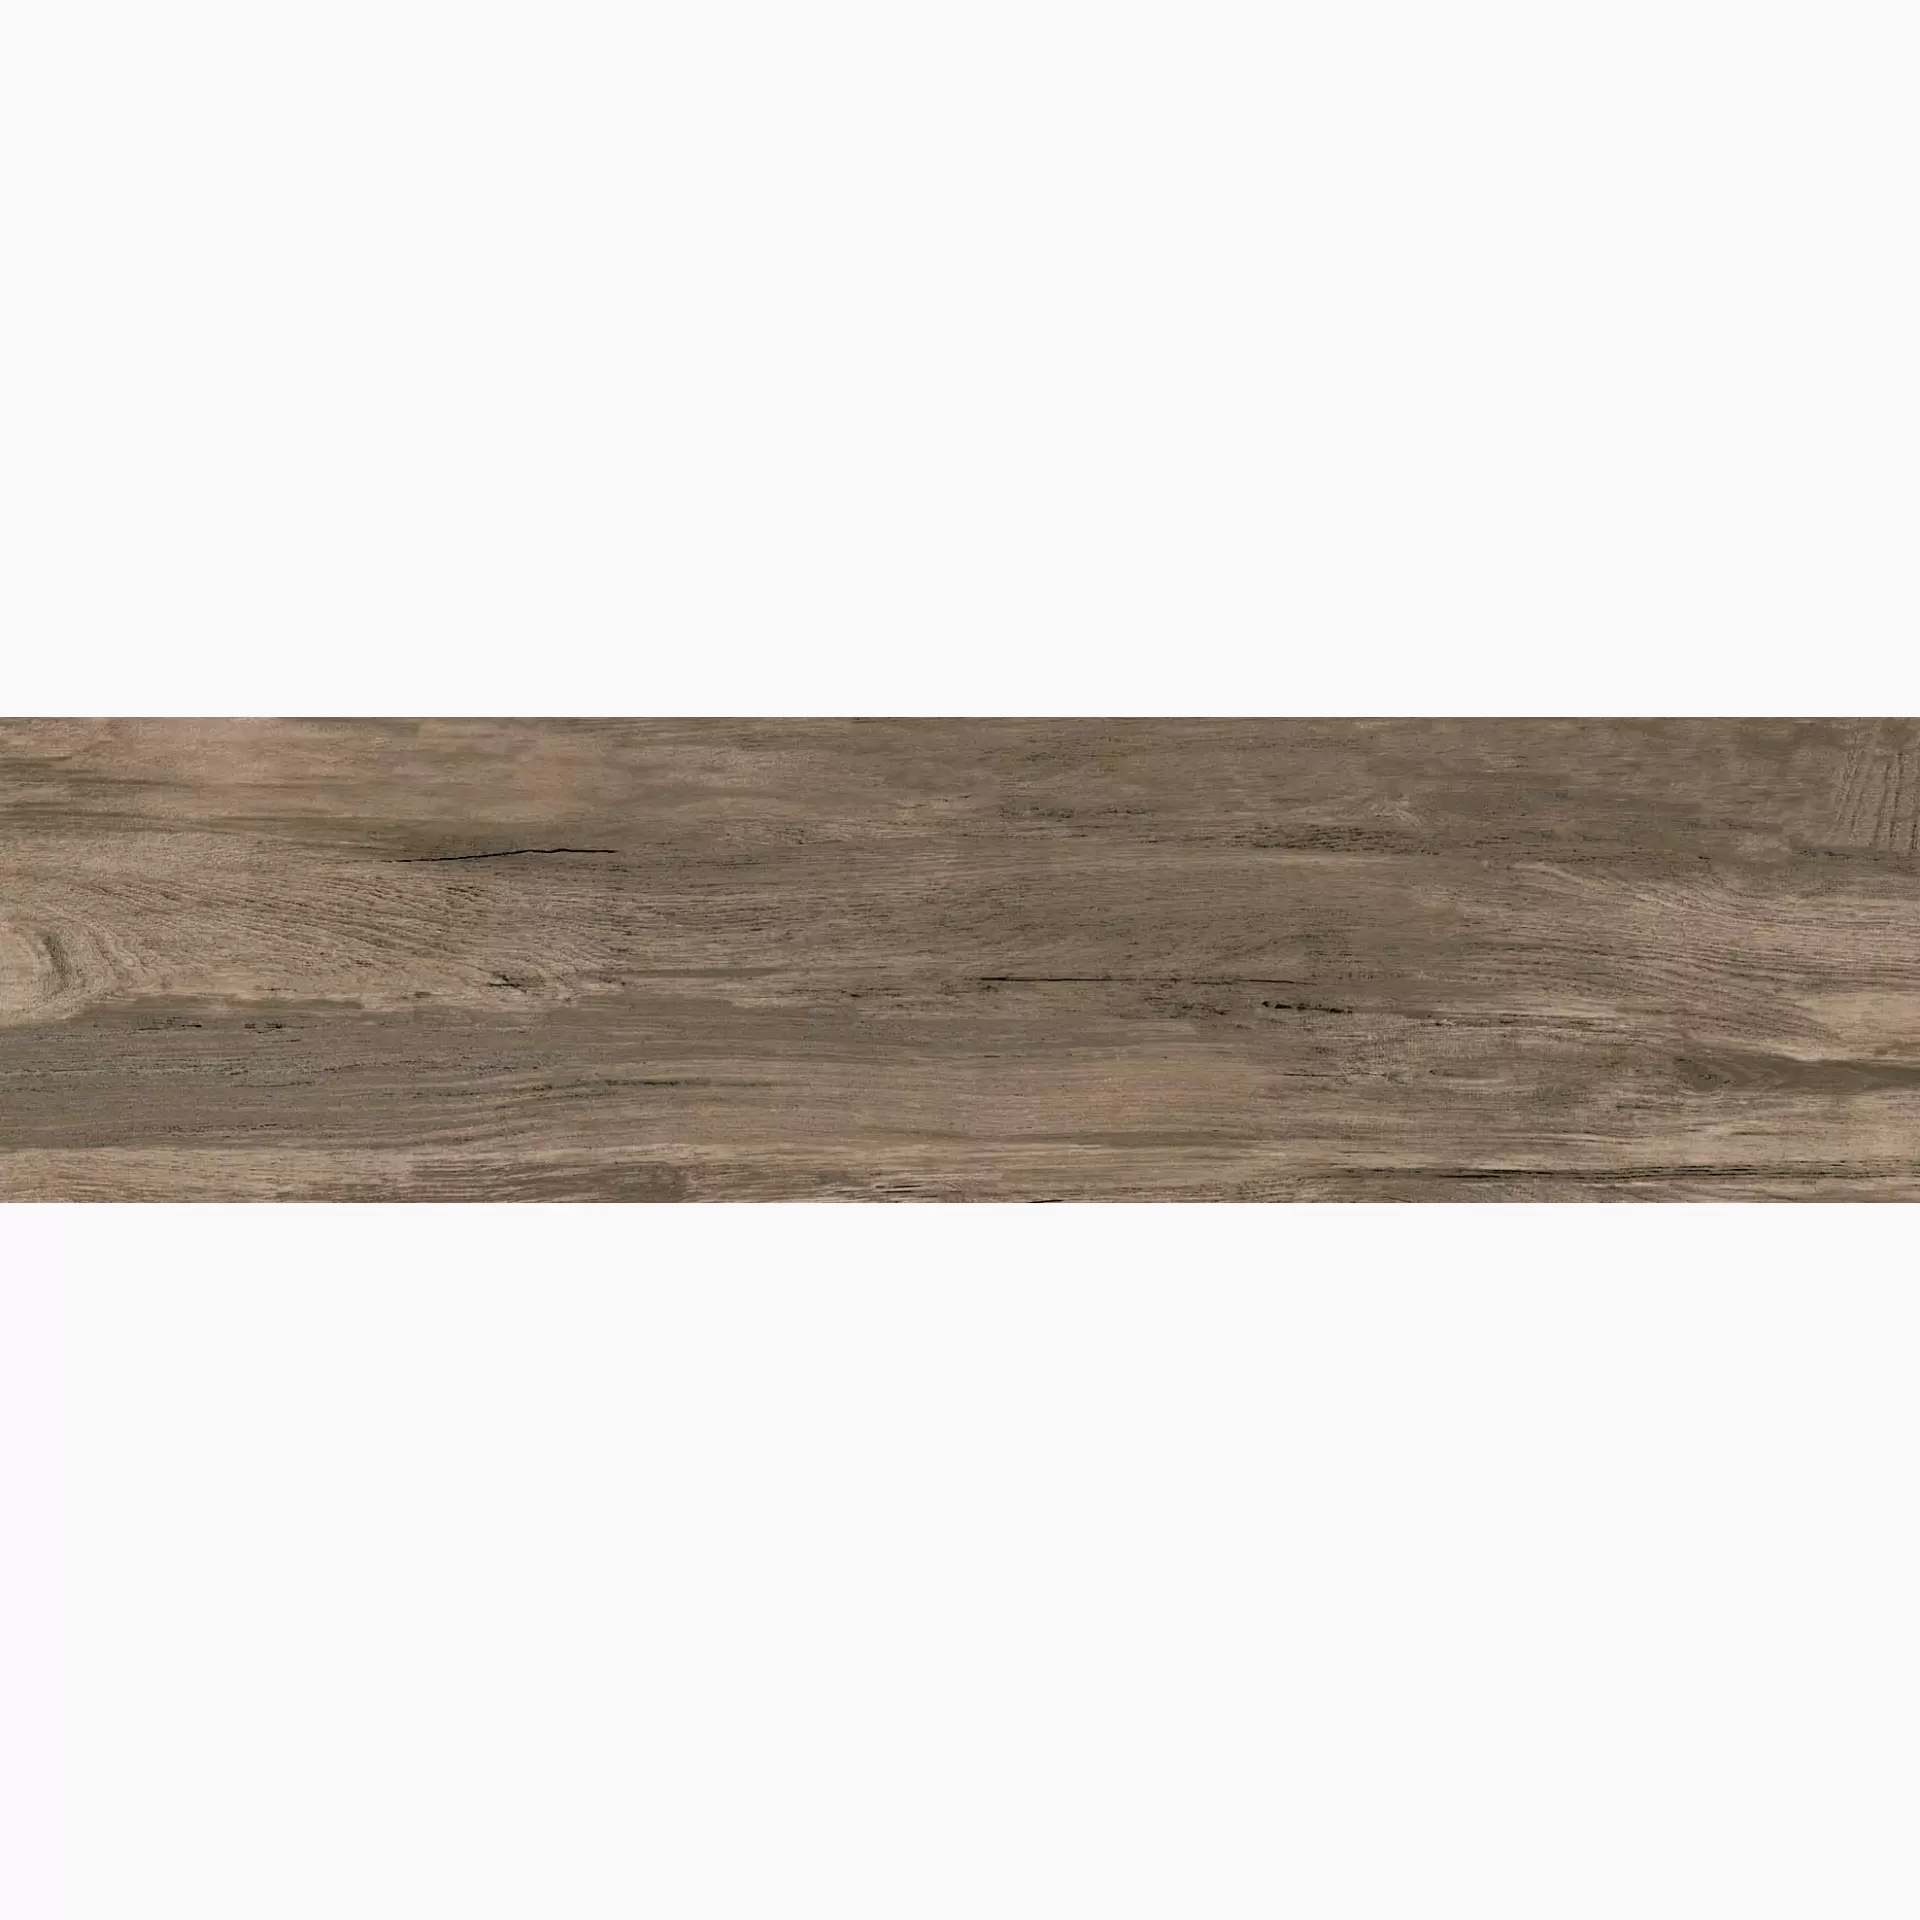 ABK Out.20 Dolphin Oak Outdoor DPR57150 30x120cm rectified 20mm